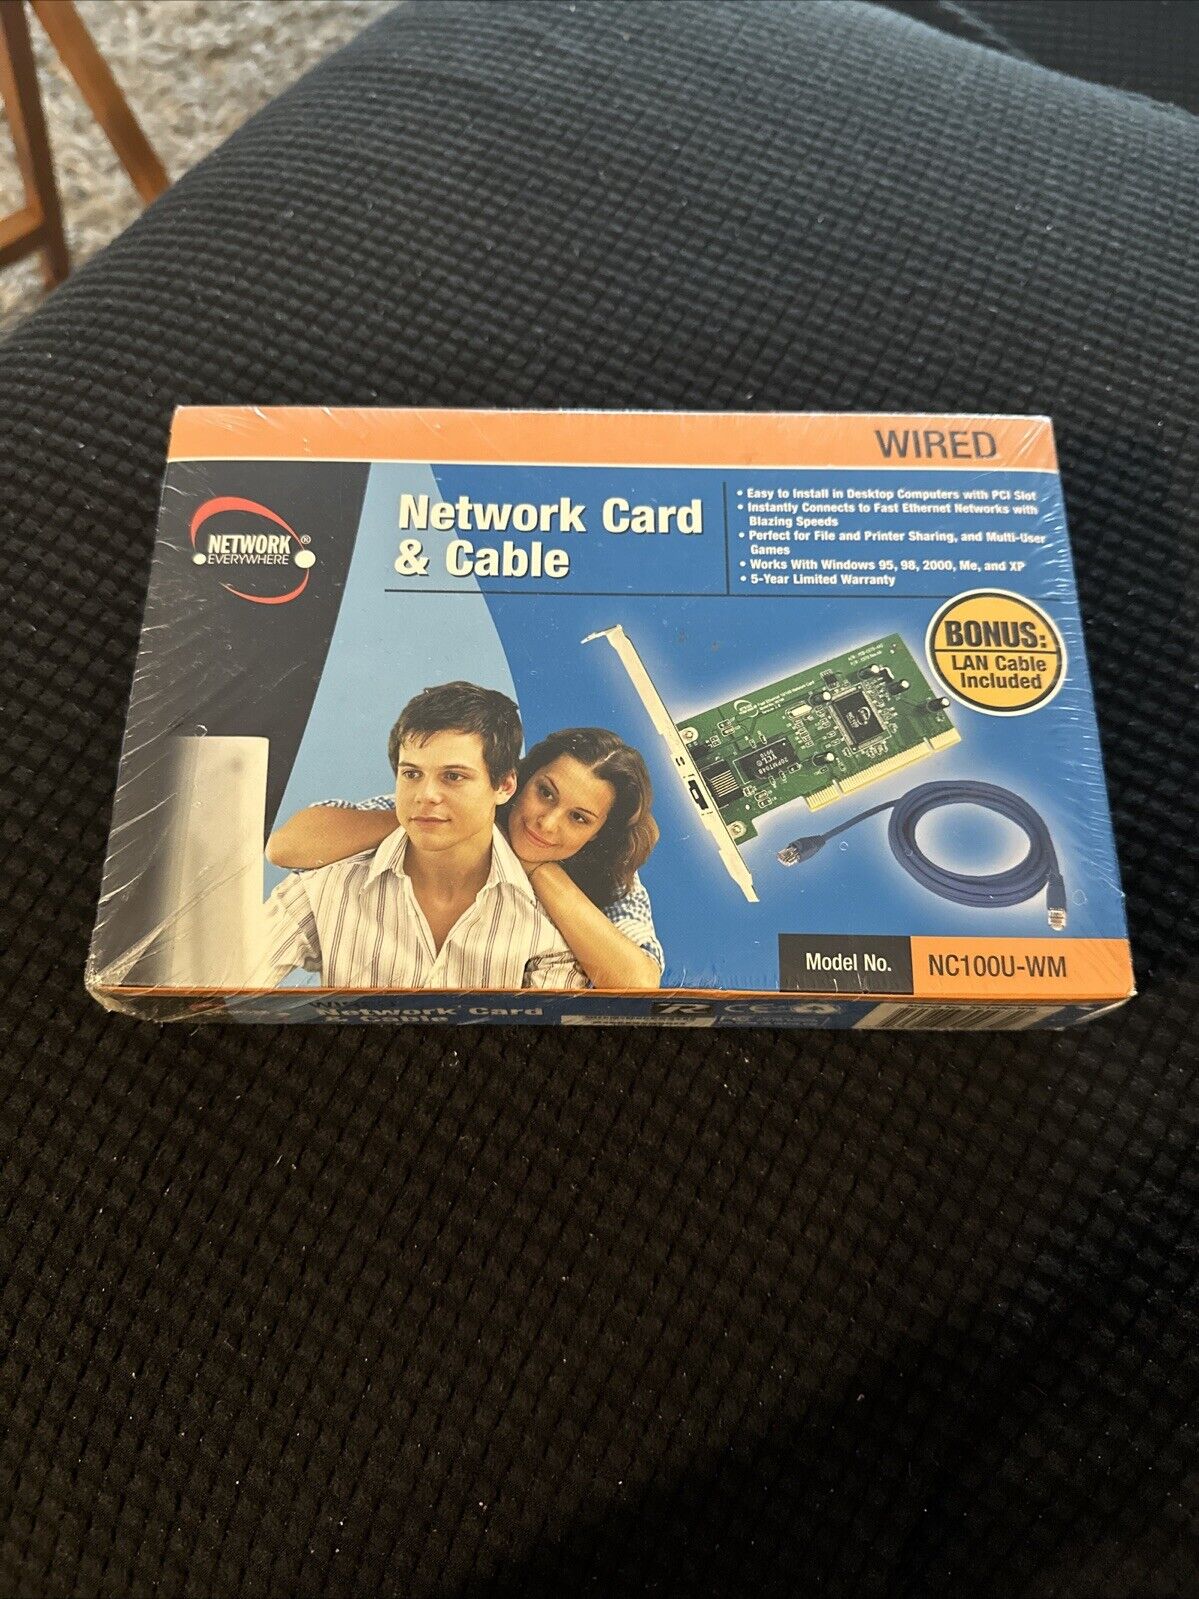 Network Everywhere Wired Network Card & Cable Model No. NC100U-WM